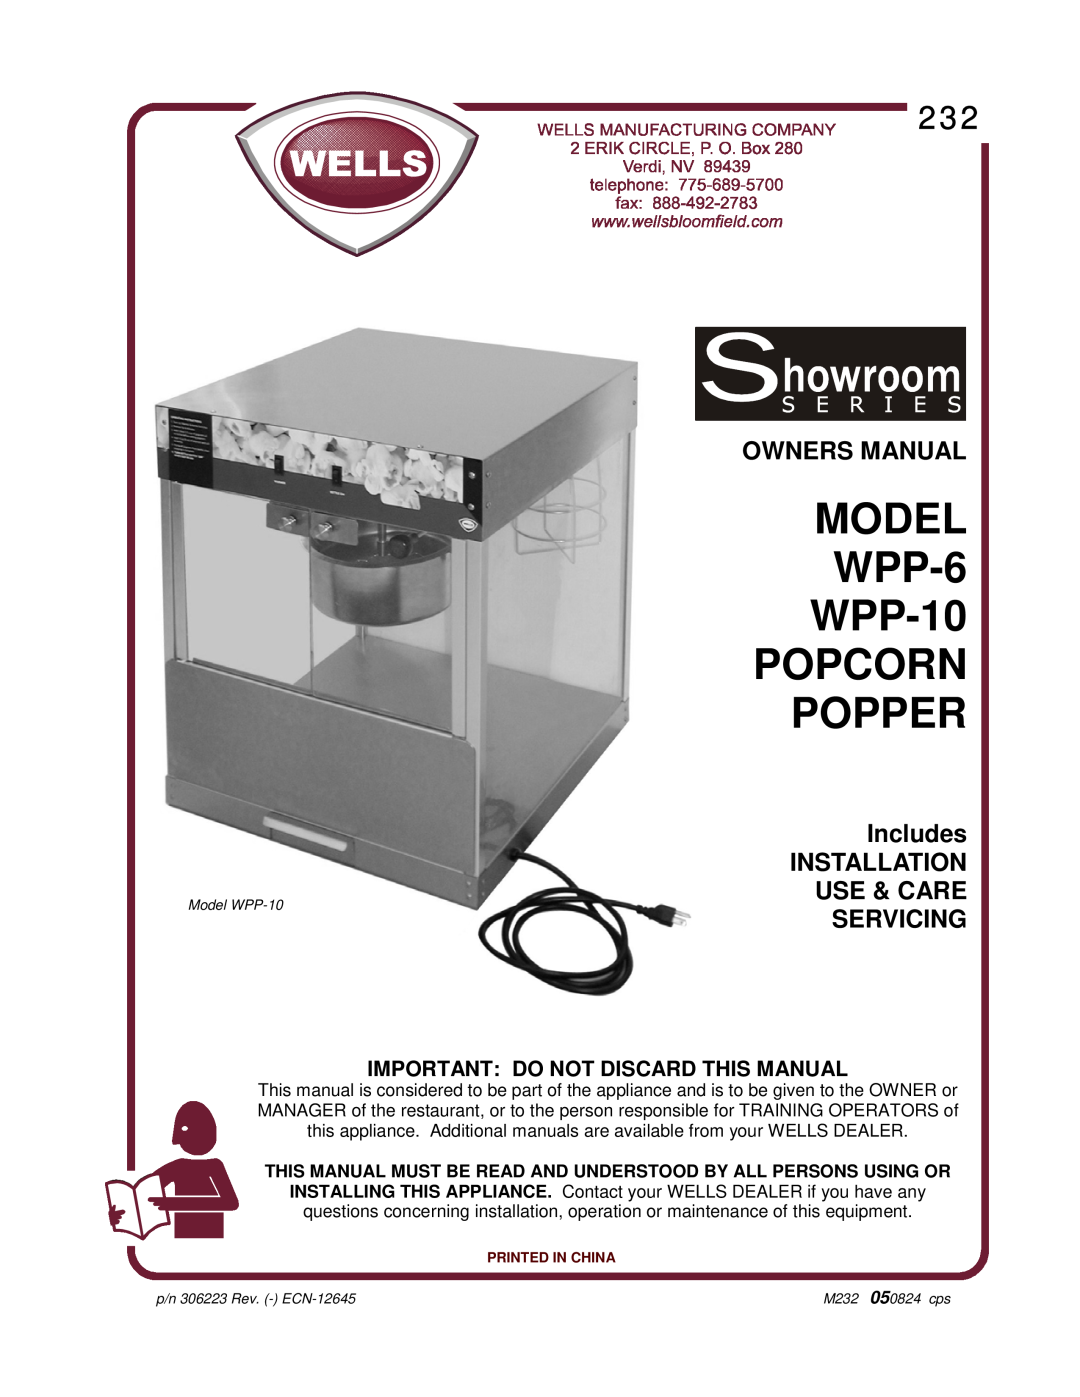 Wells WPP-6, WPP-10 owner manual Includes, Important Do Not Discard This Manual, MODEL WPP-6 WPP-10 POPCORN POPPER 